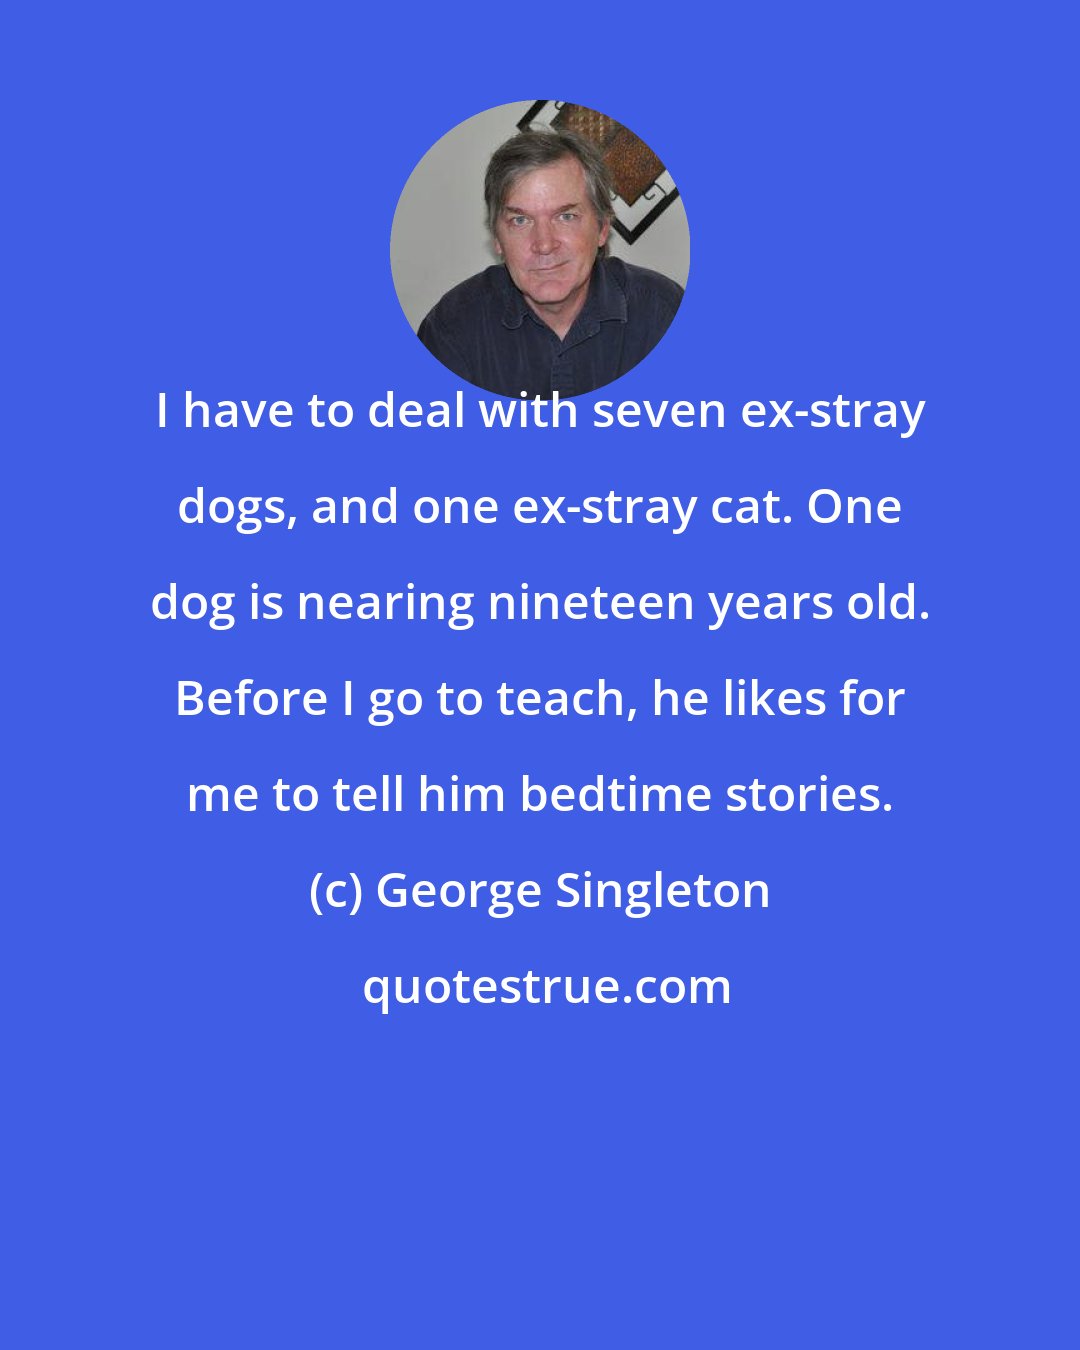 George Singleton: I have to deal with seven ex-stray dogs, and one ex-stray cat. One dog is nearing nineteen years old. Before I go to teach, he likes for me to tell him bedtime stories.